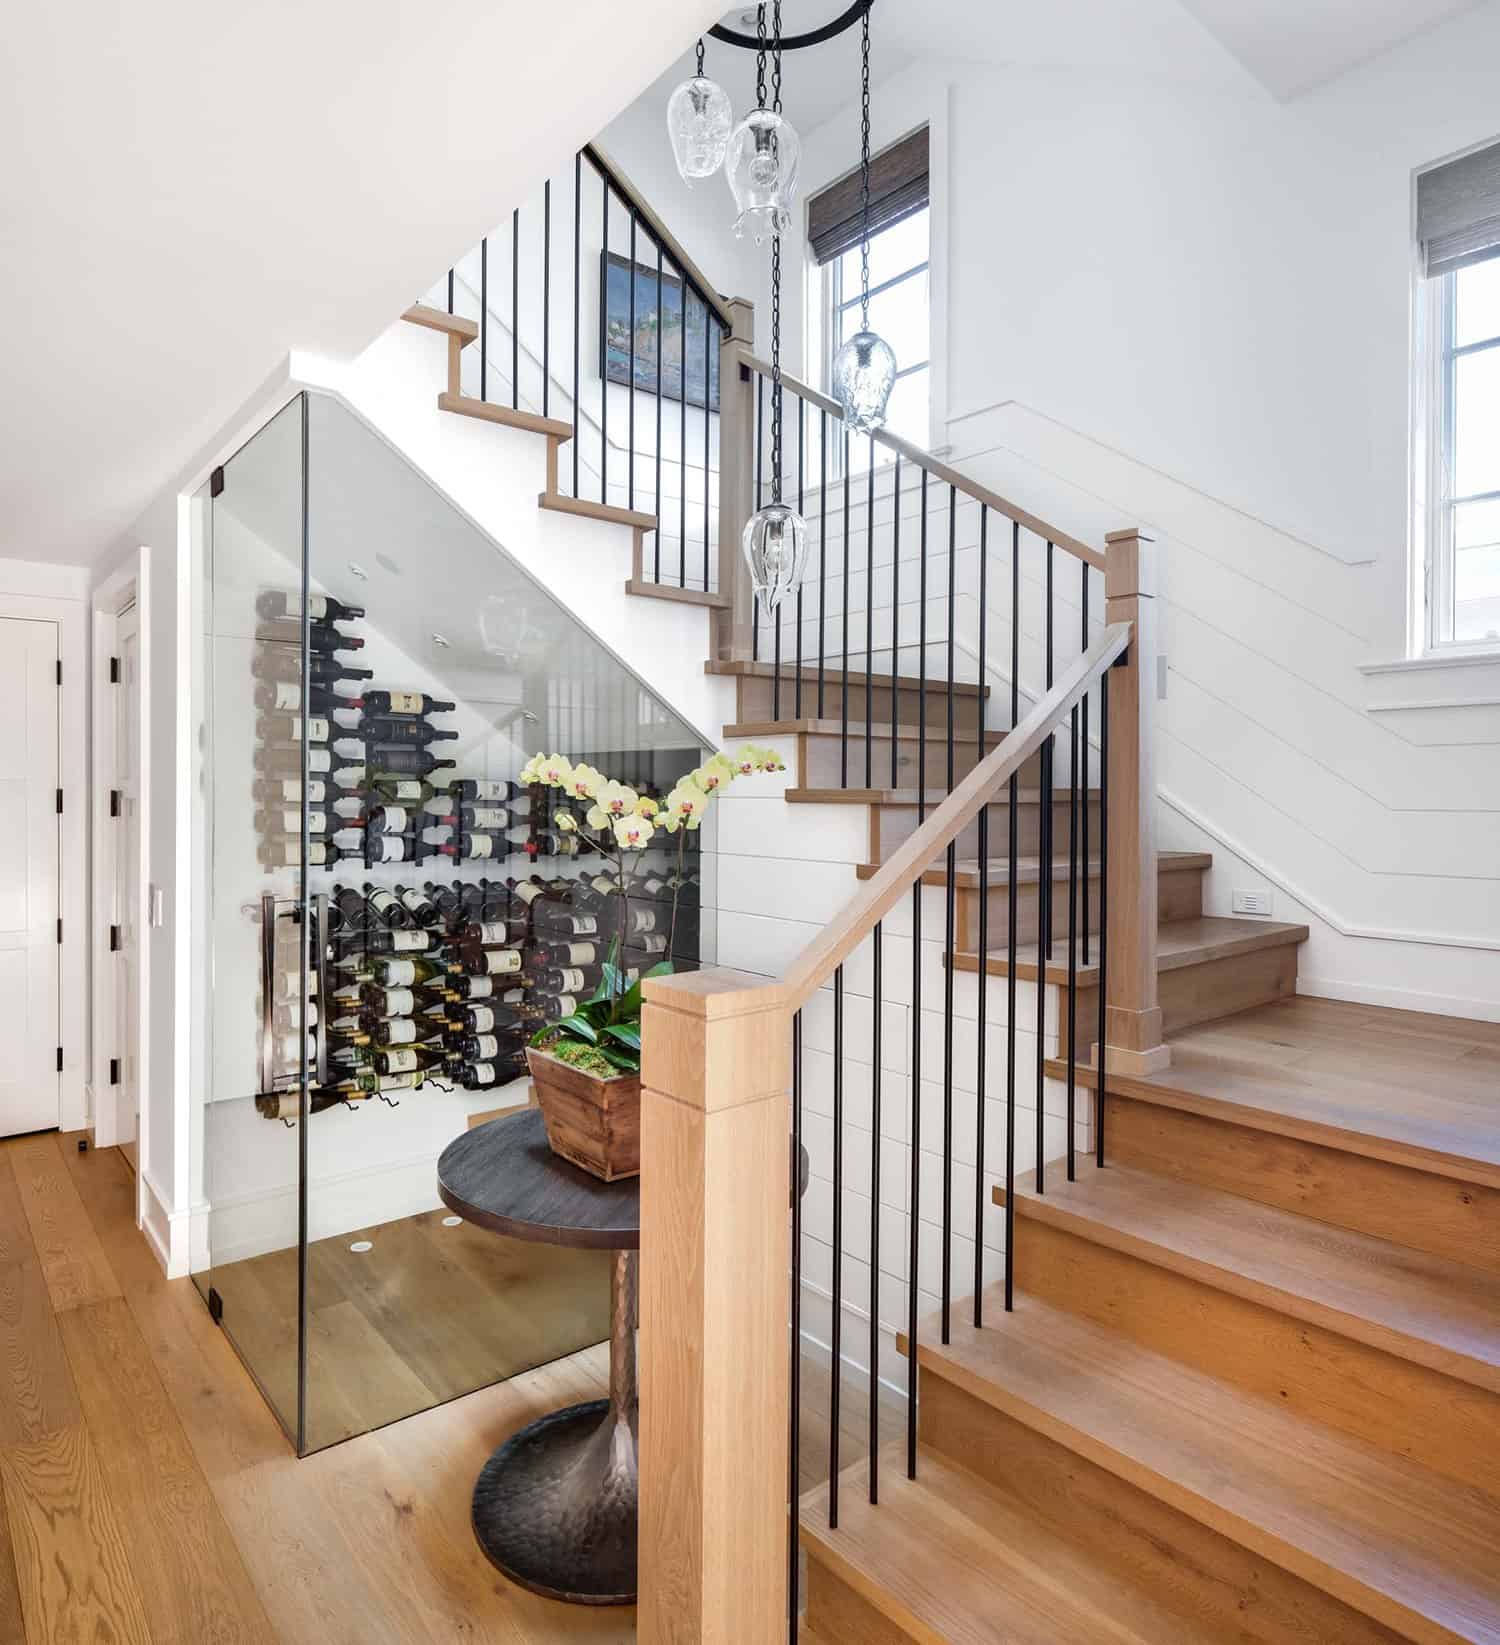 beach-style-staircase-with-wine-cellar